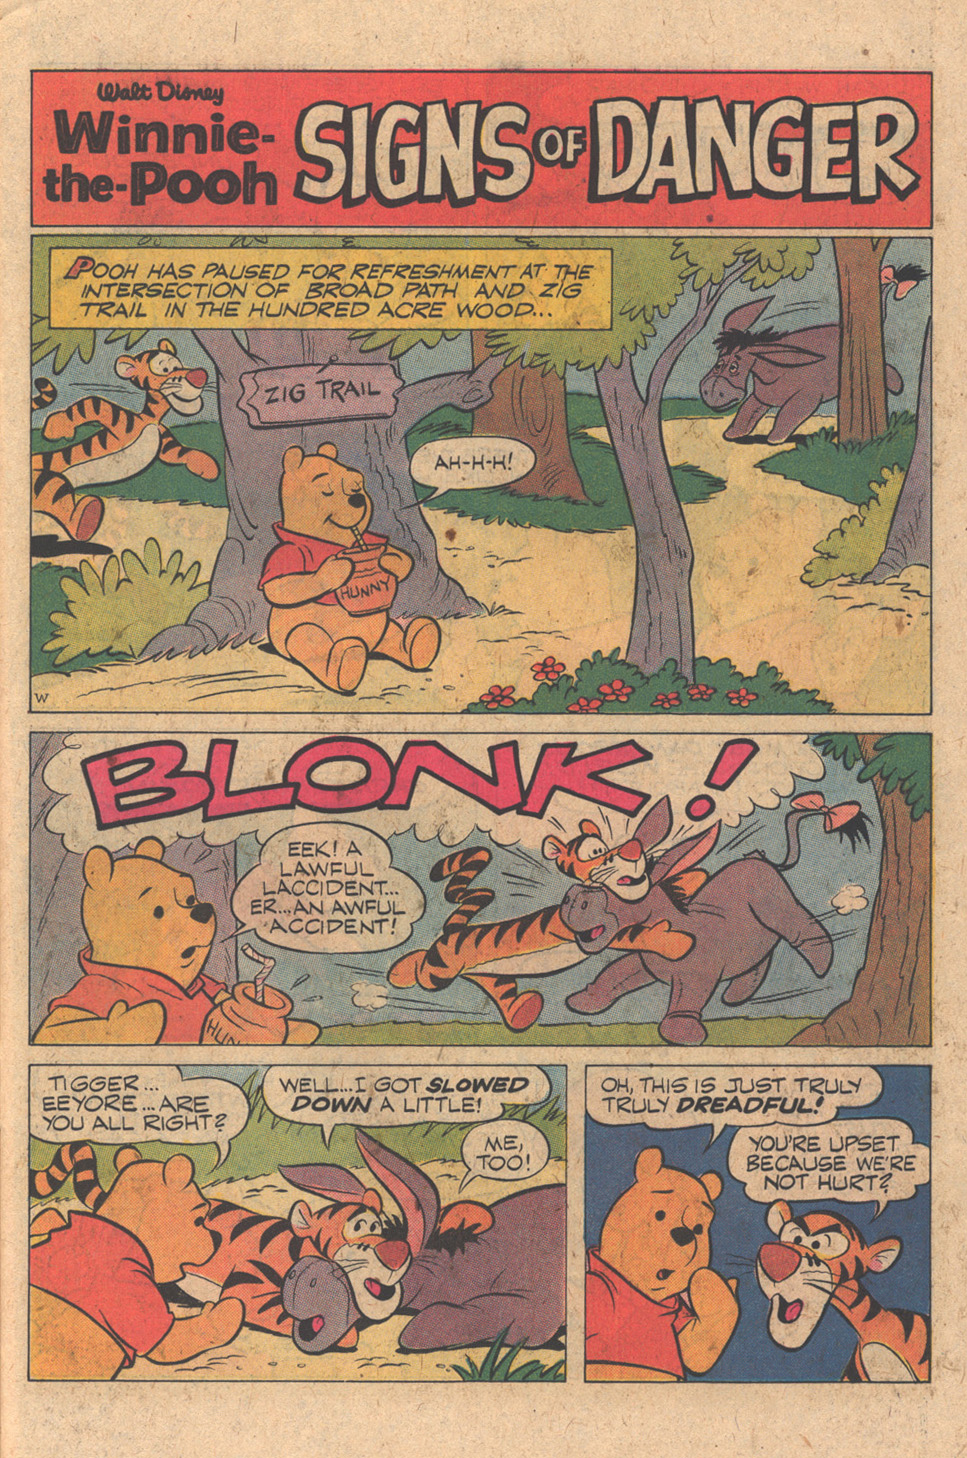 Read online Winnie-the-Pooh comic -  Issue #4 - 11